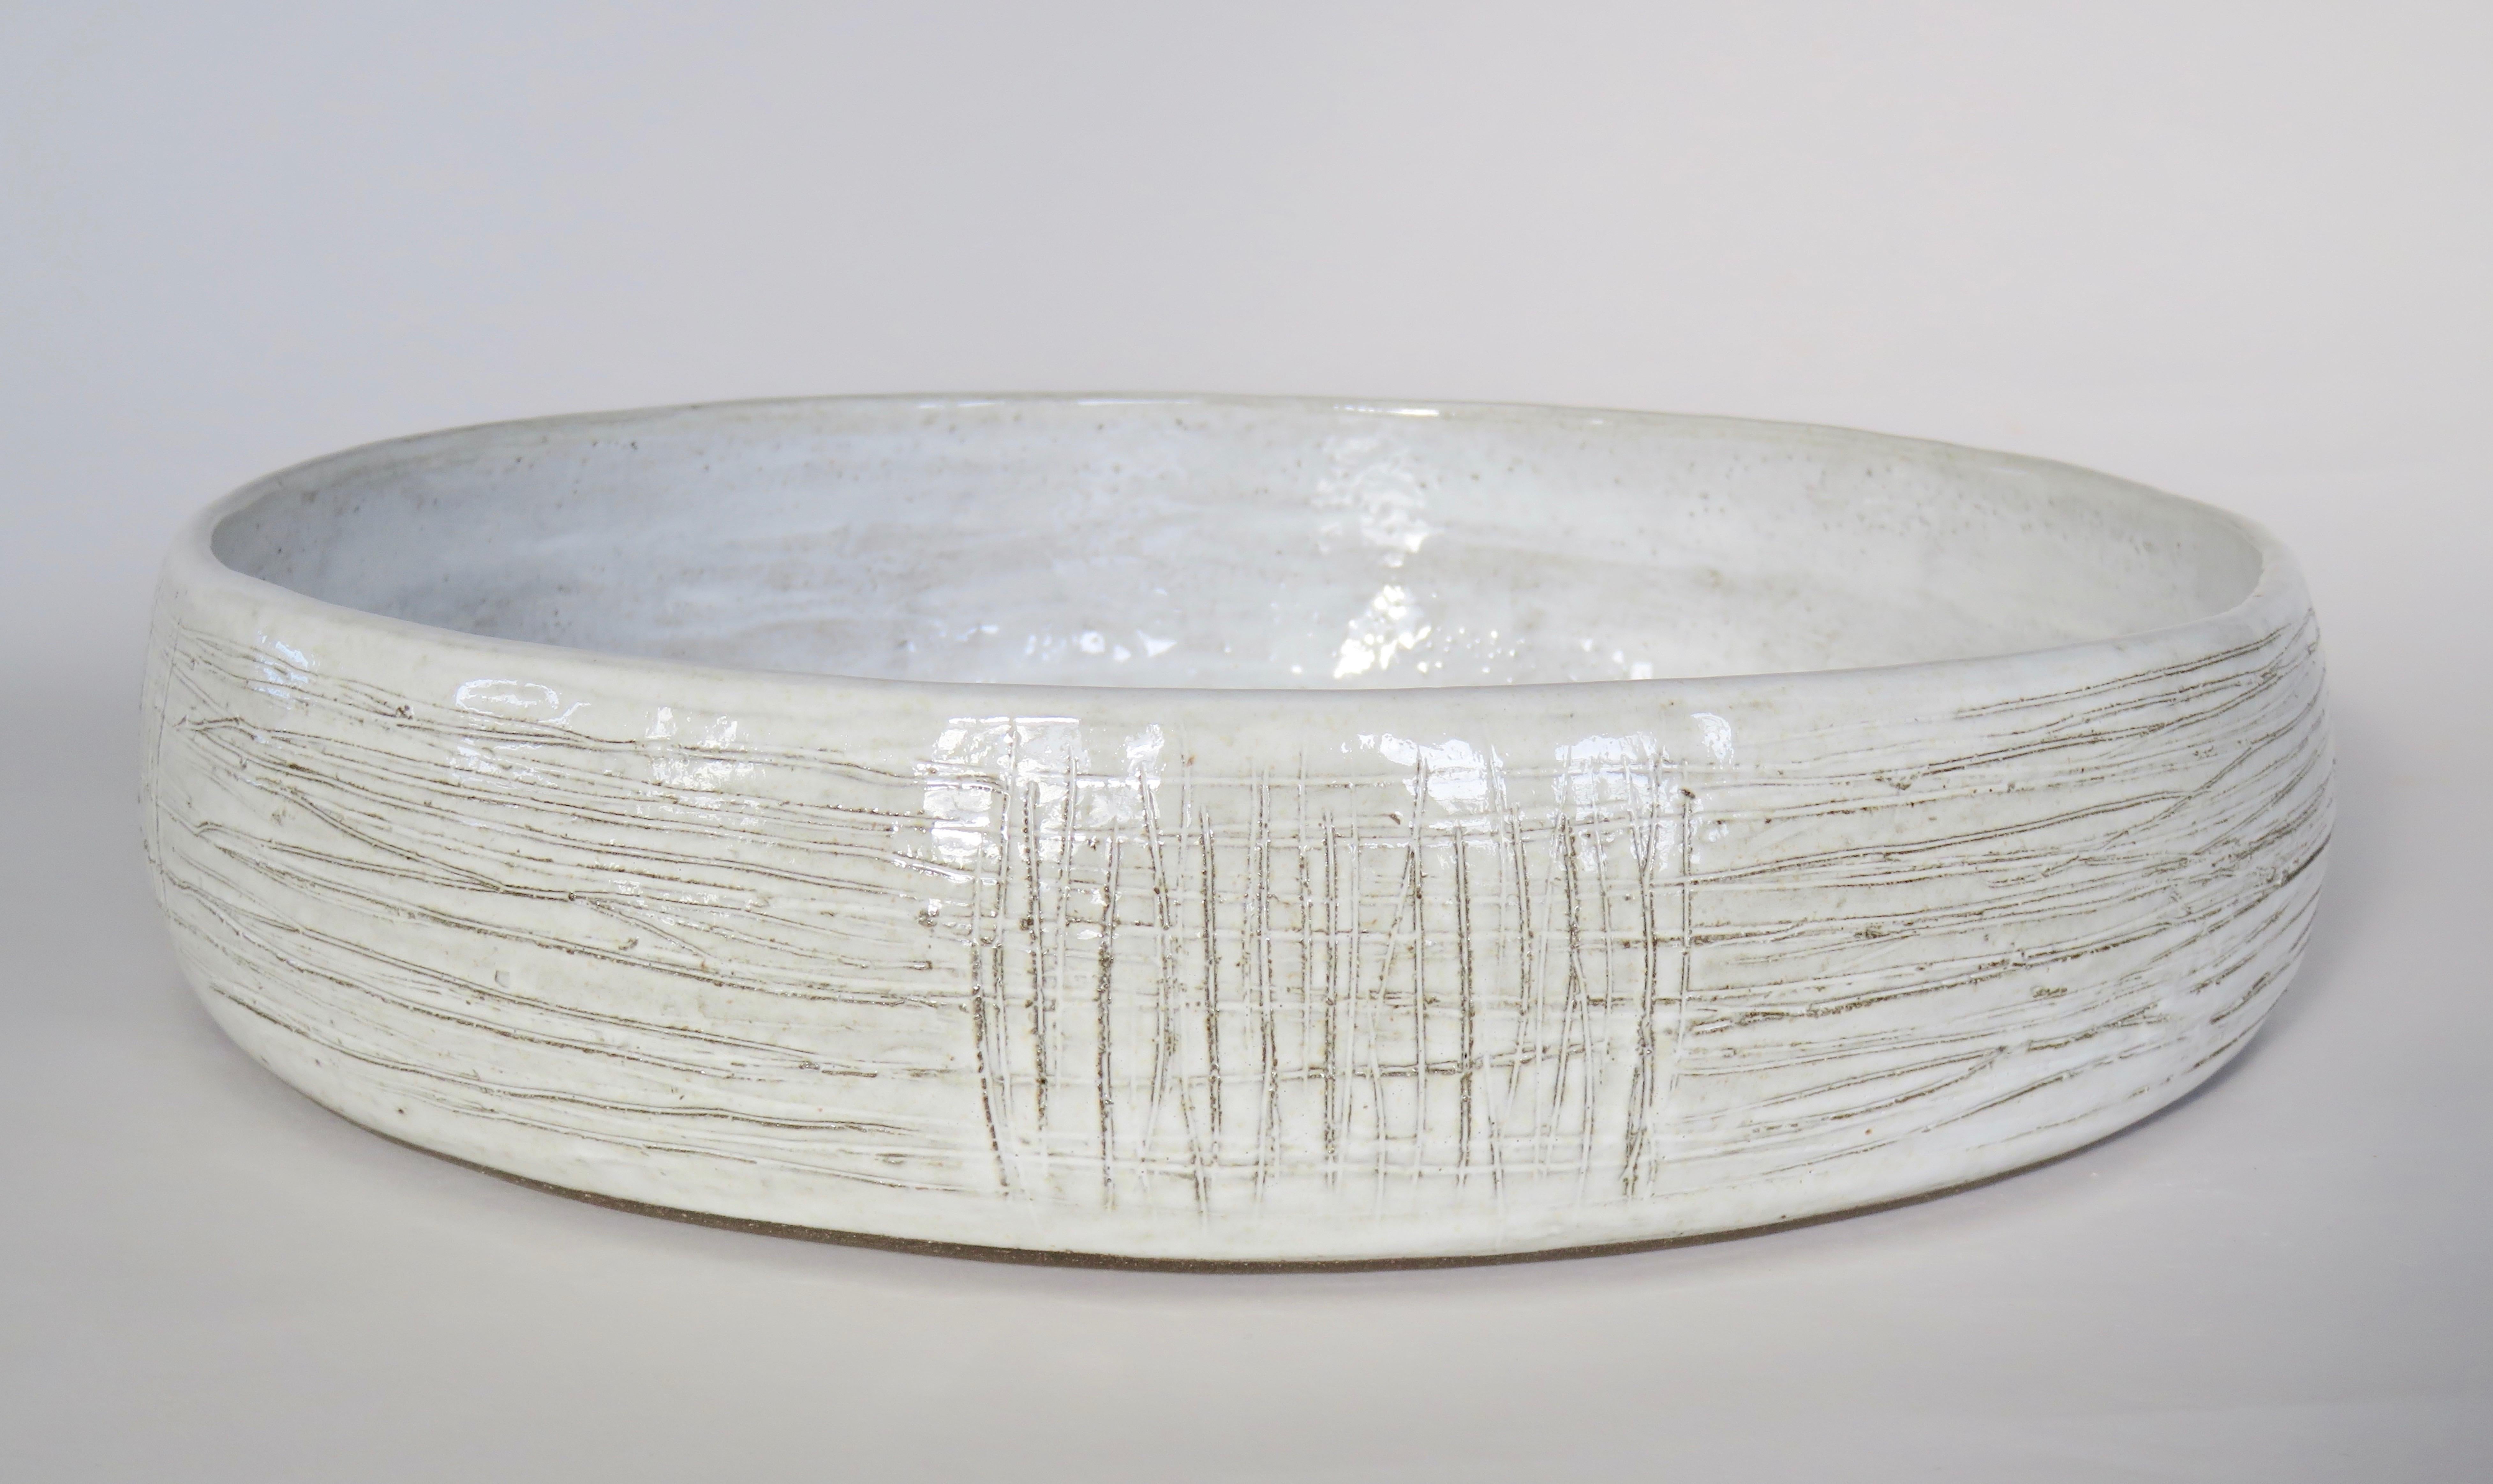 Large, wide and low ceramic stoneware serving bowl and center piece, 14.5 inches in diameter. Distinctive hand carved geometric lines on the outside and a glossy white glaze, reveal the dark clay body underneath.
Fully handmade. Each one is